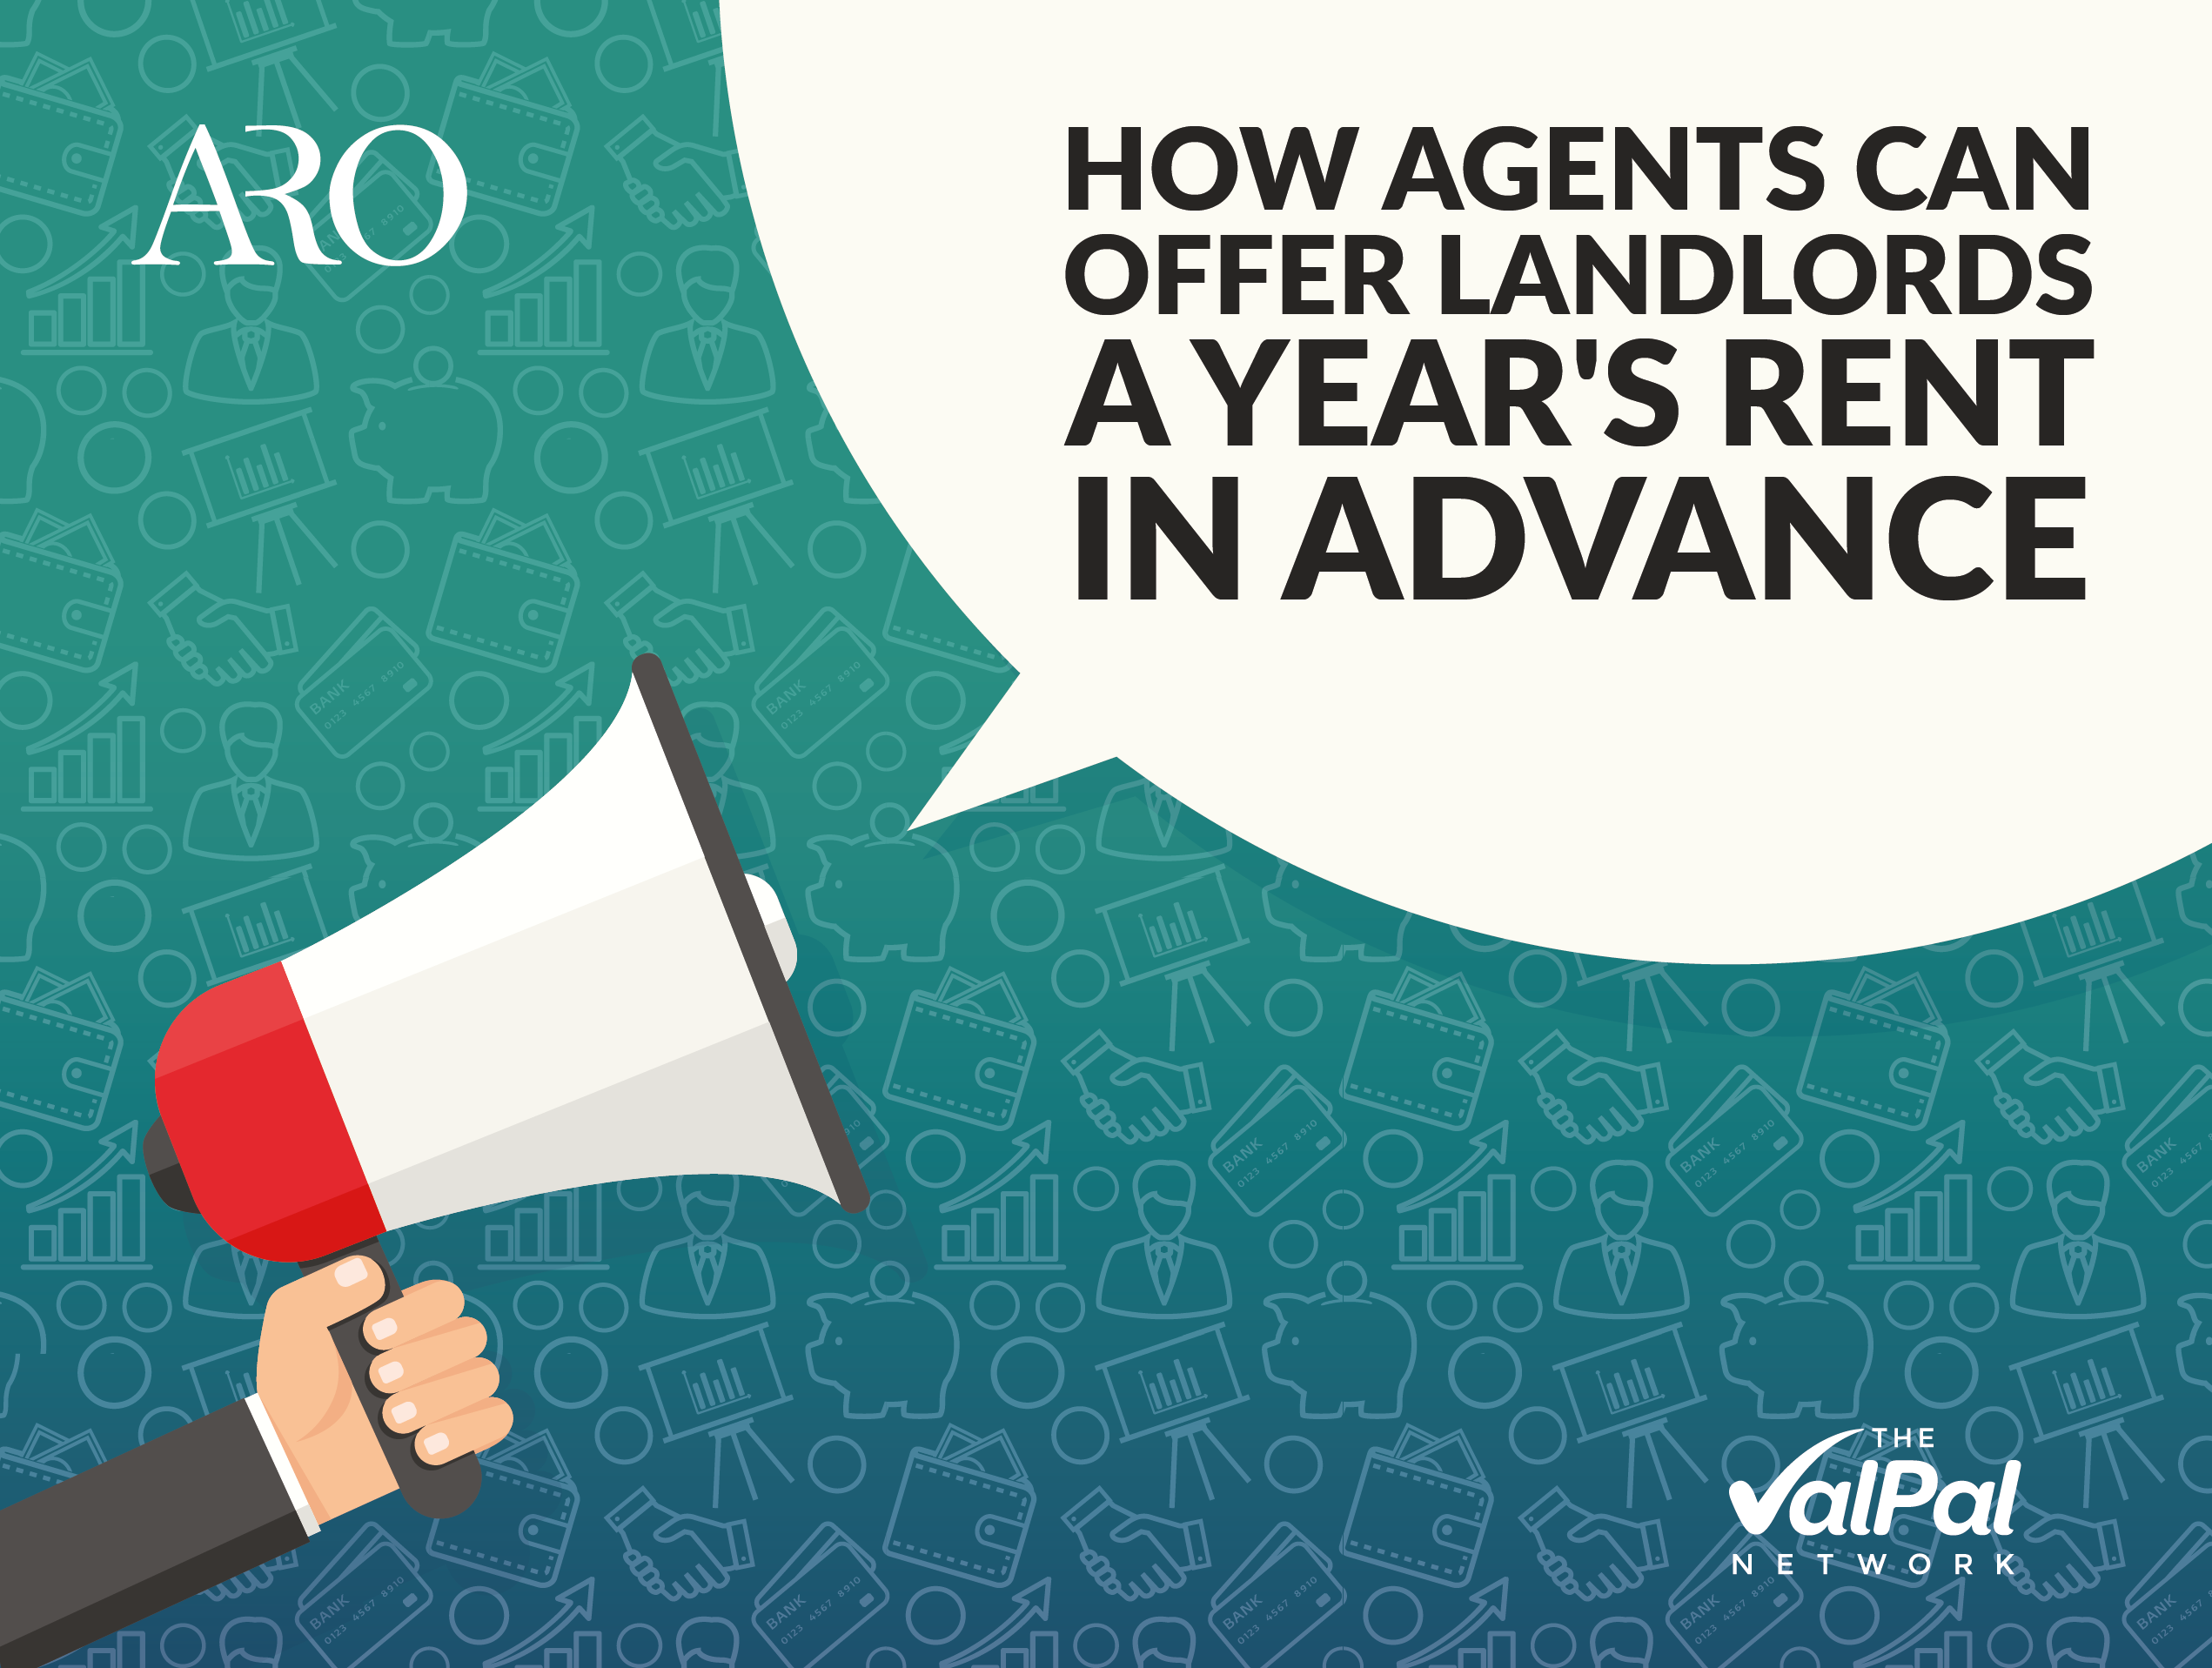 Revealed – how agents can offer landlords up to a year’s rent in advance